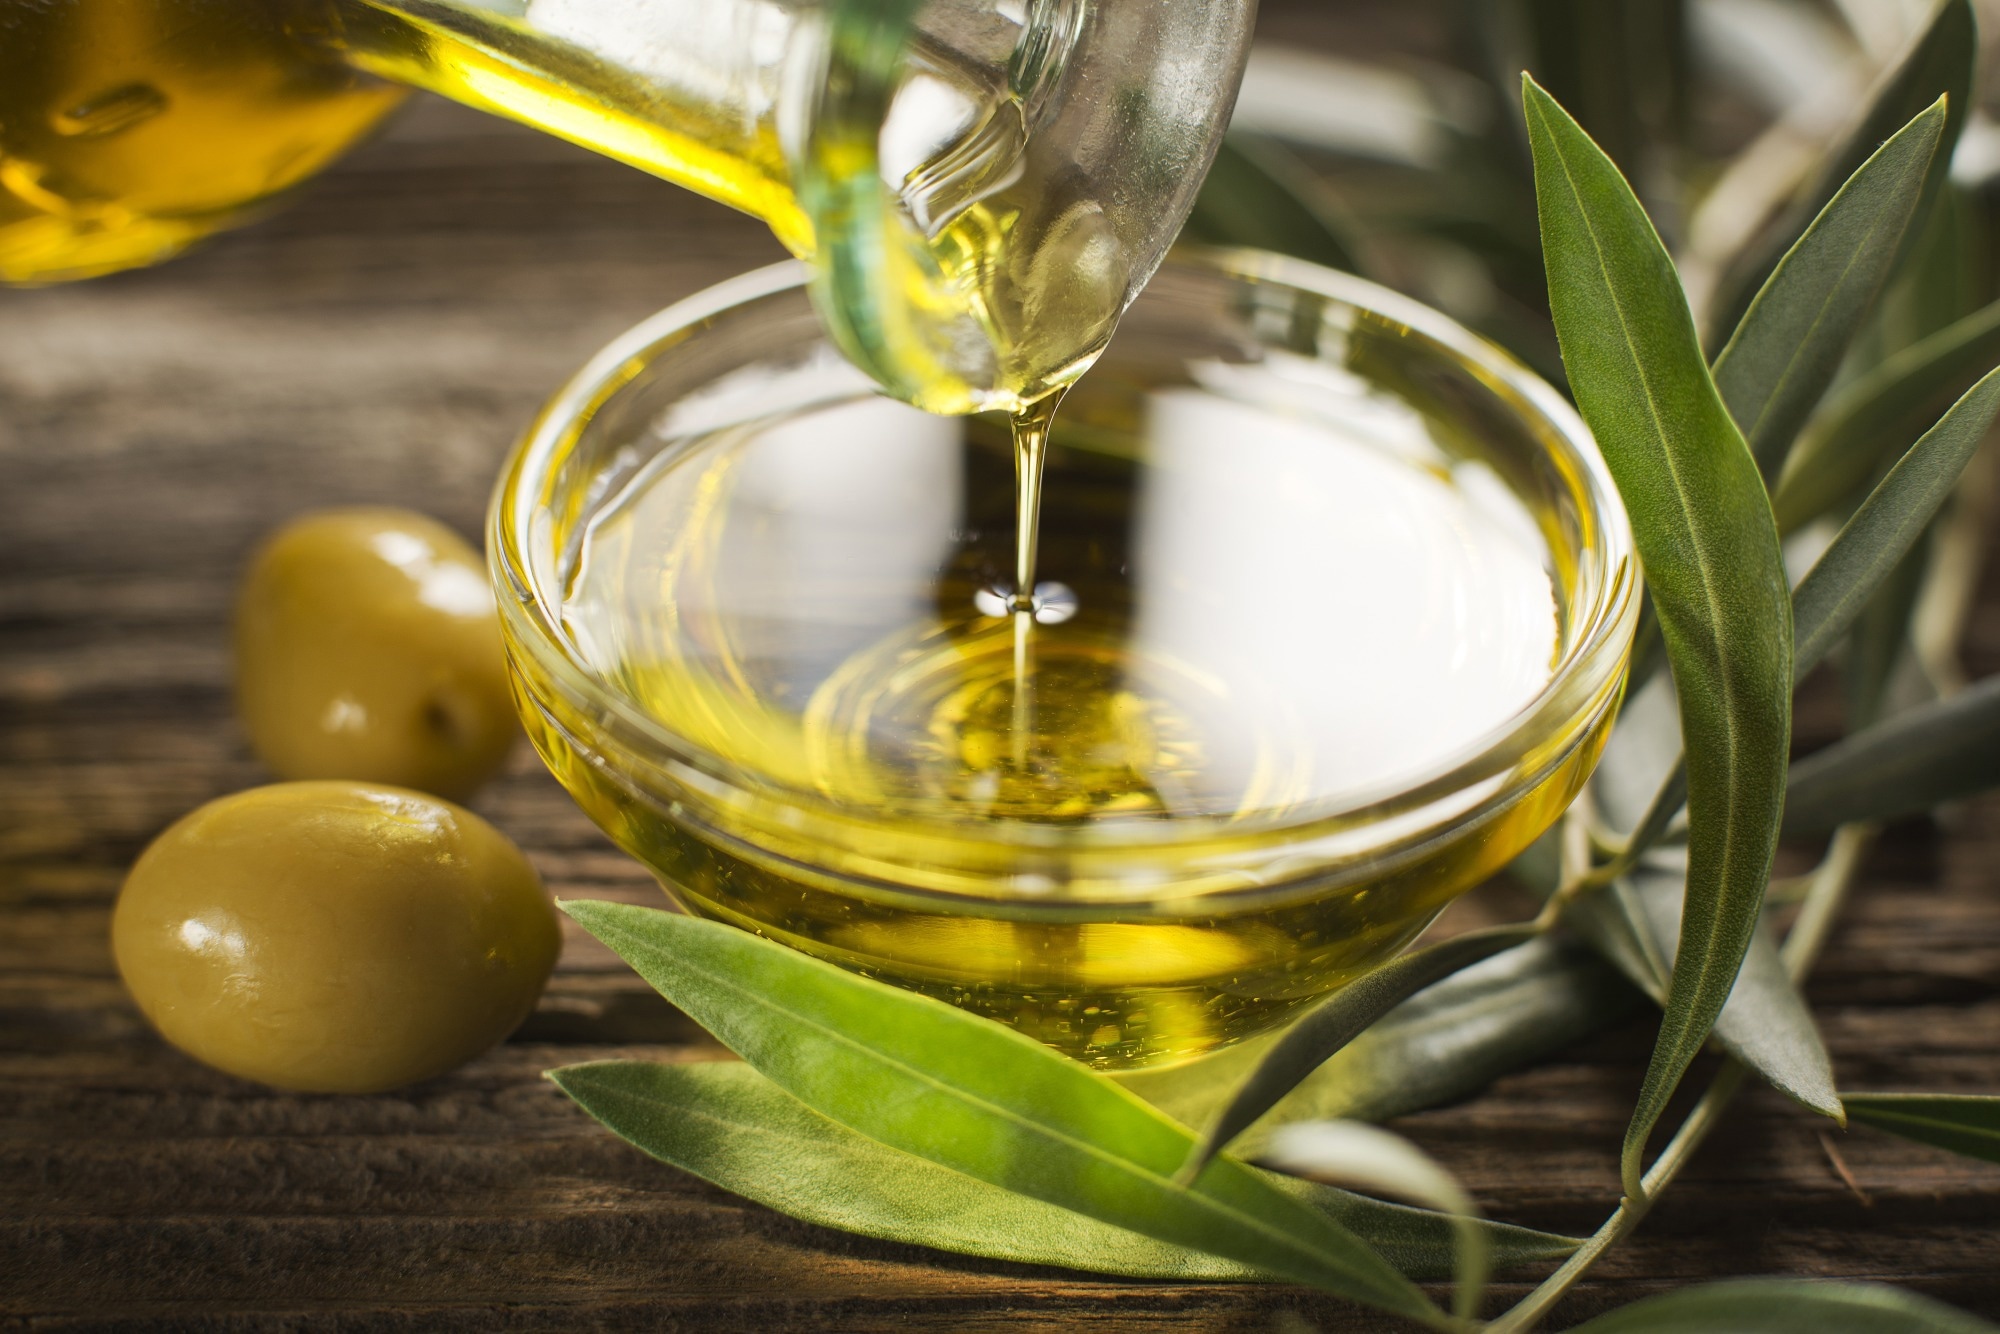 Study: Olive Oil Components as Novel Antioxidants in Neuroblastoma Treatment: Exploring the Therapeutic Potential of Oleuropein and Hydroxytyrosol. Image Credit: DUSAN ZIDAR/Shutterstock.com